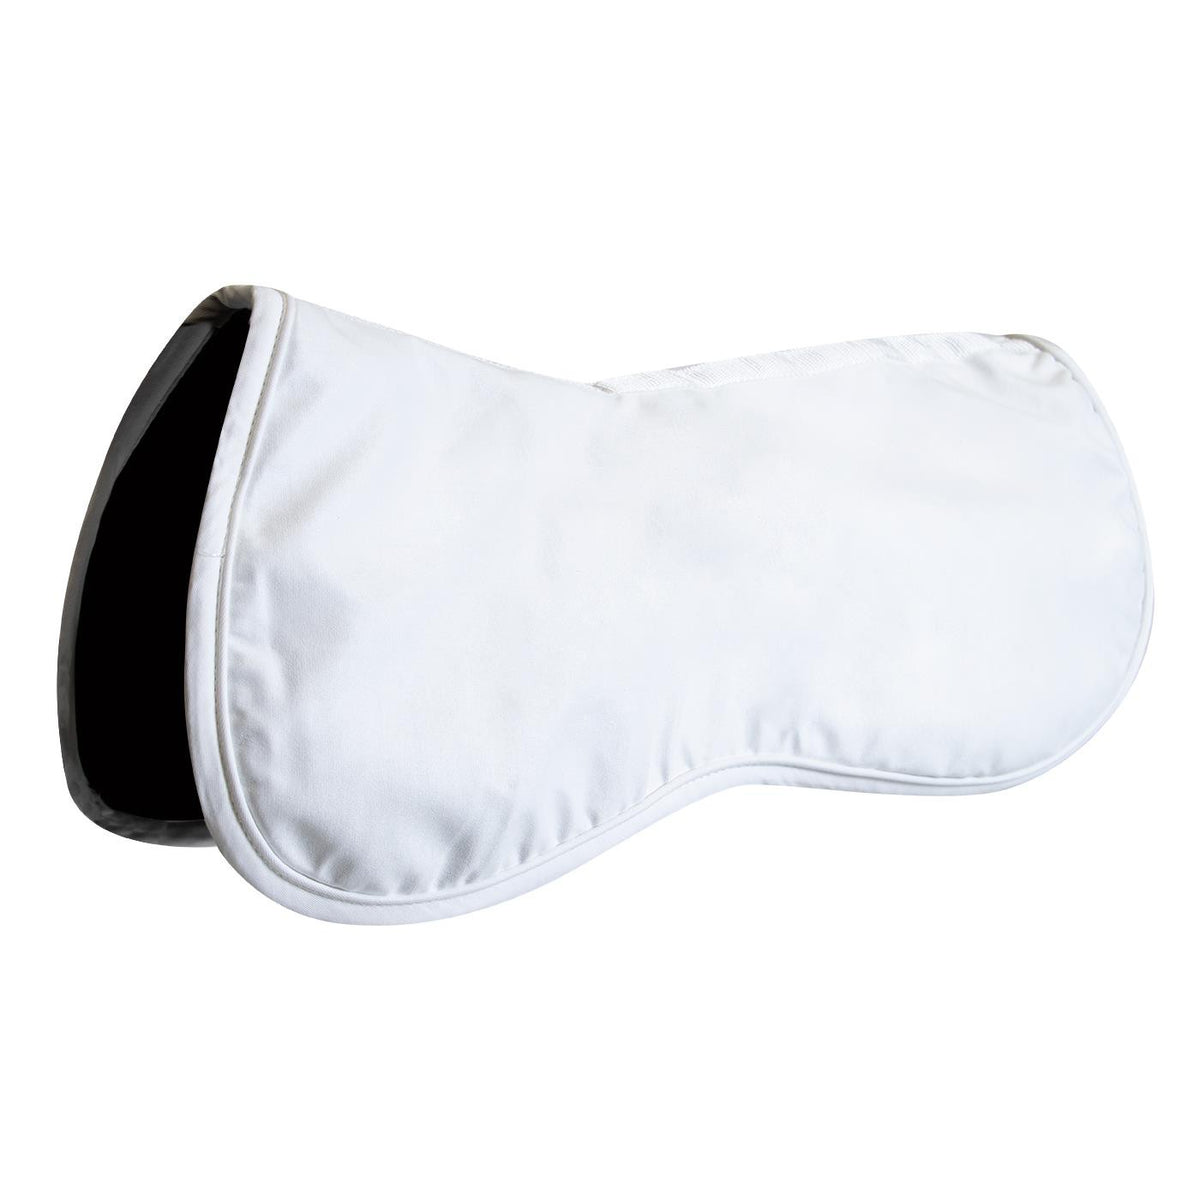 CLEAROUT - Le Mieux Sports Grip Memory Foam Half Pad - Sprucewood Tack